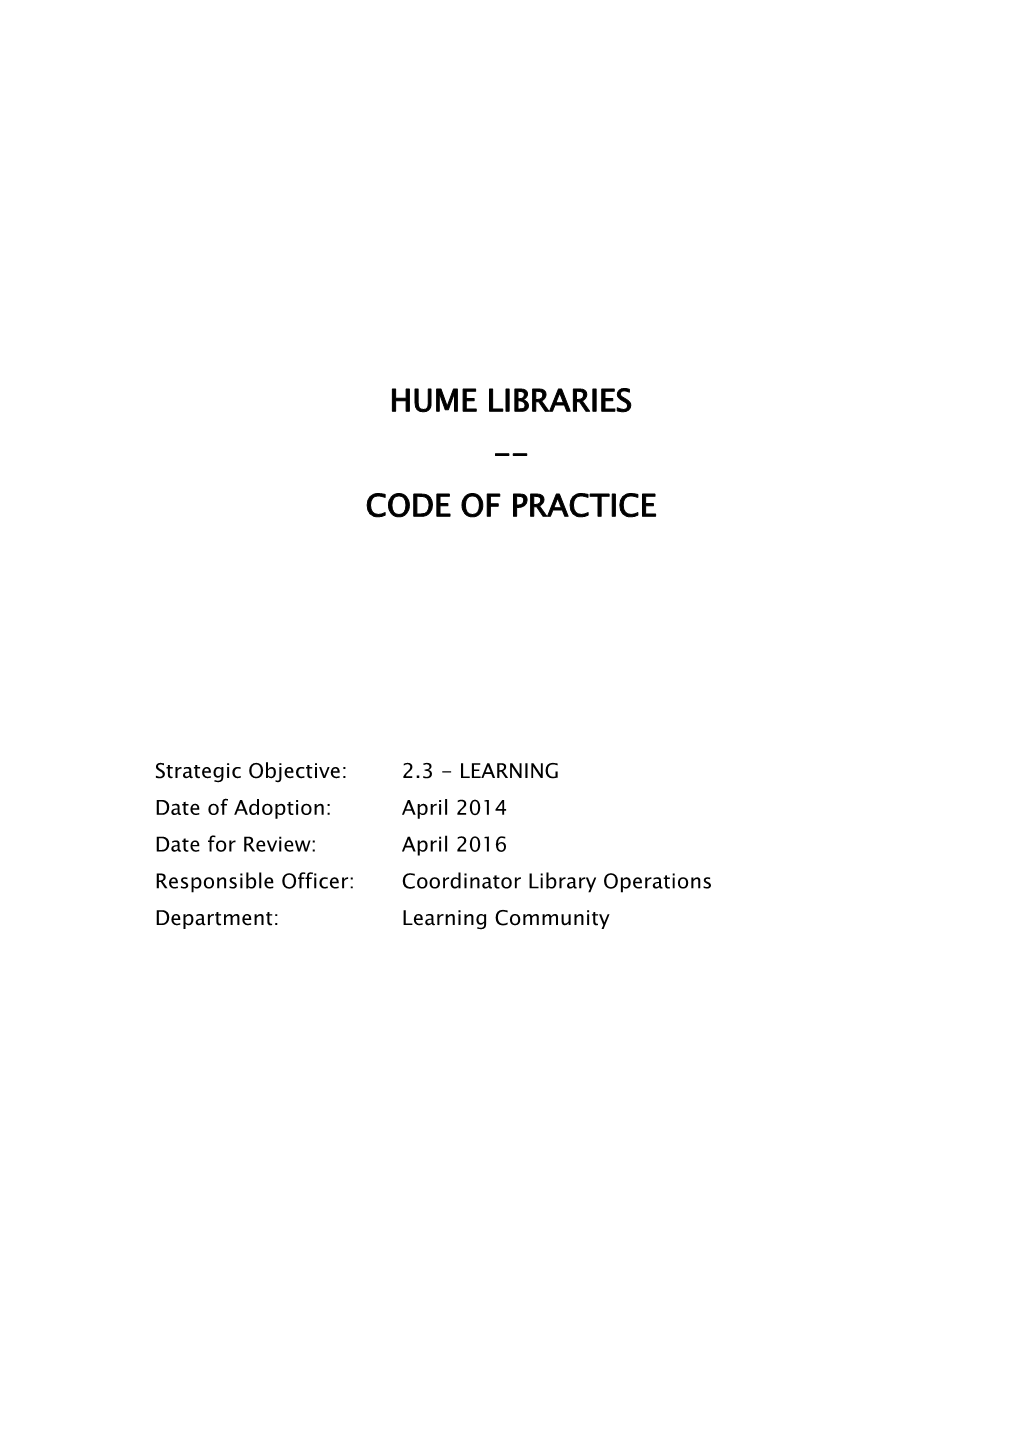 Code of Practice Hume Libraries